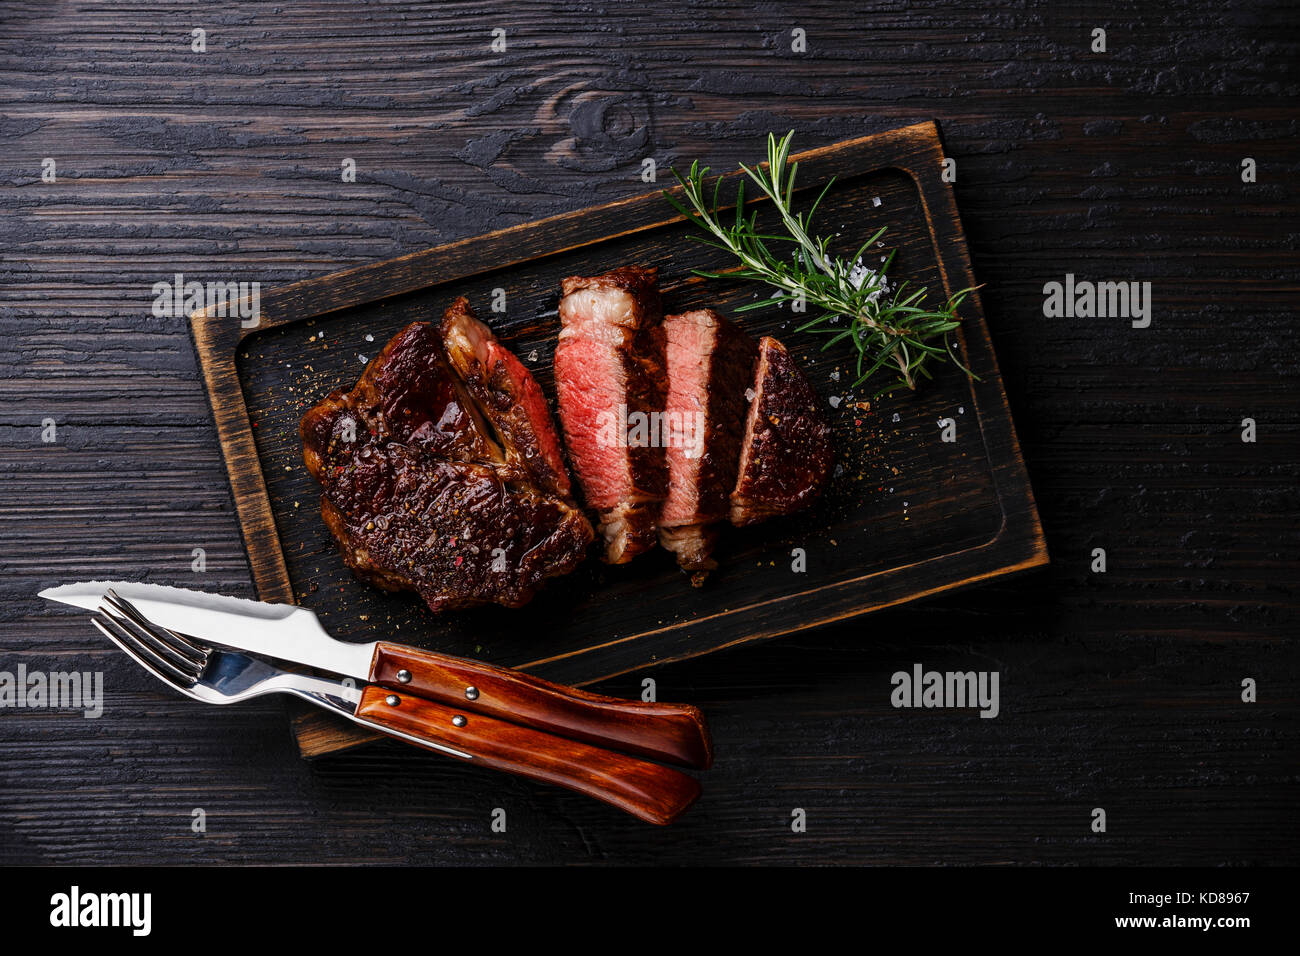 Sliced grilled meat barbecue steak Rib eye with knife and fork on burned black wooden background Stock Photo